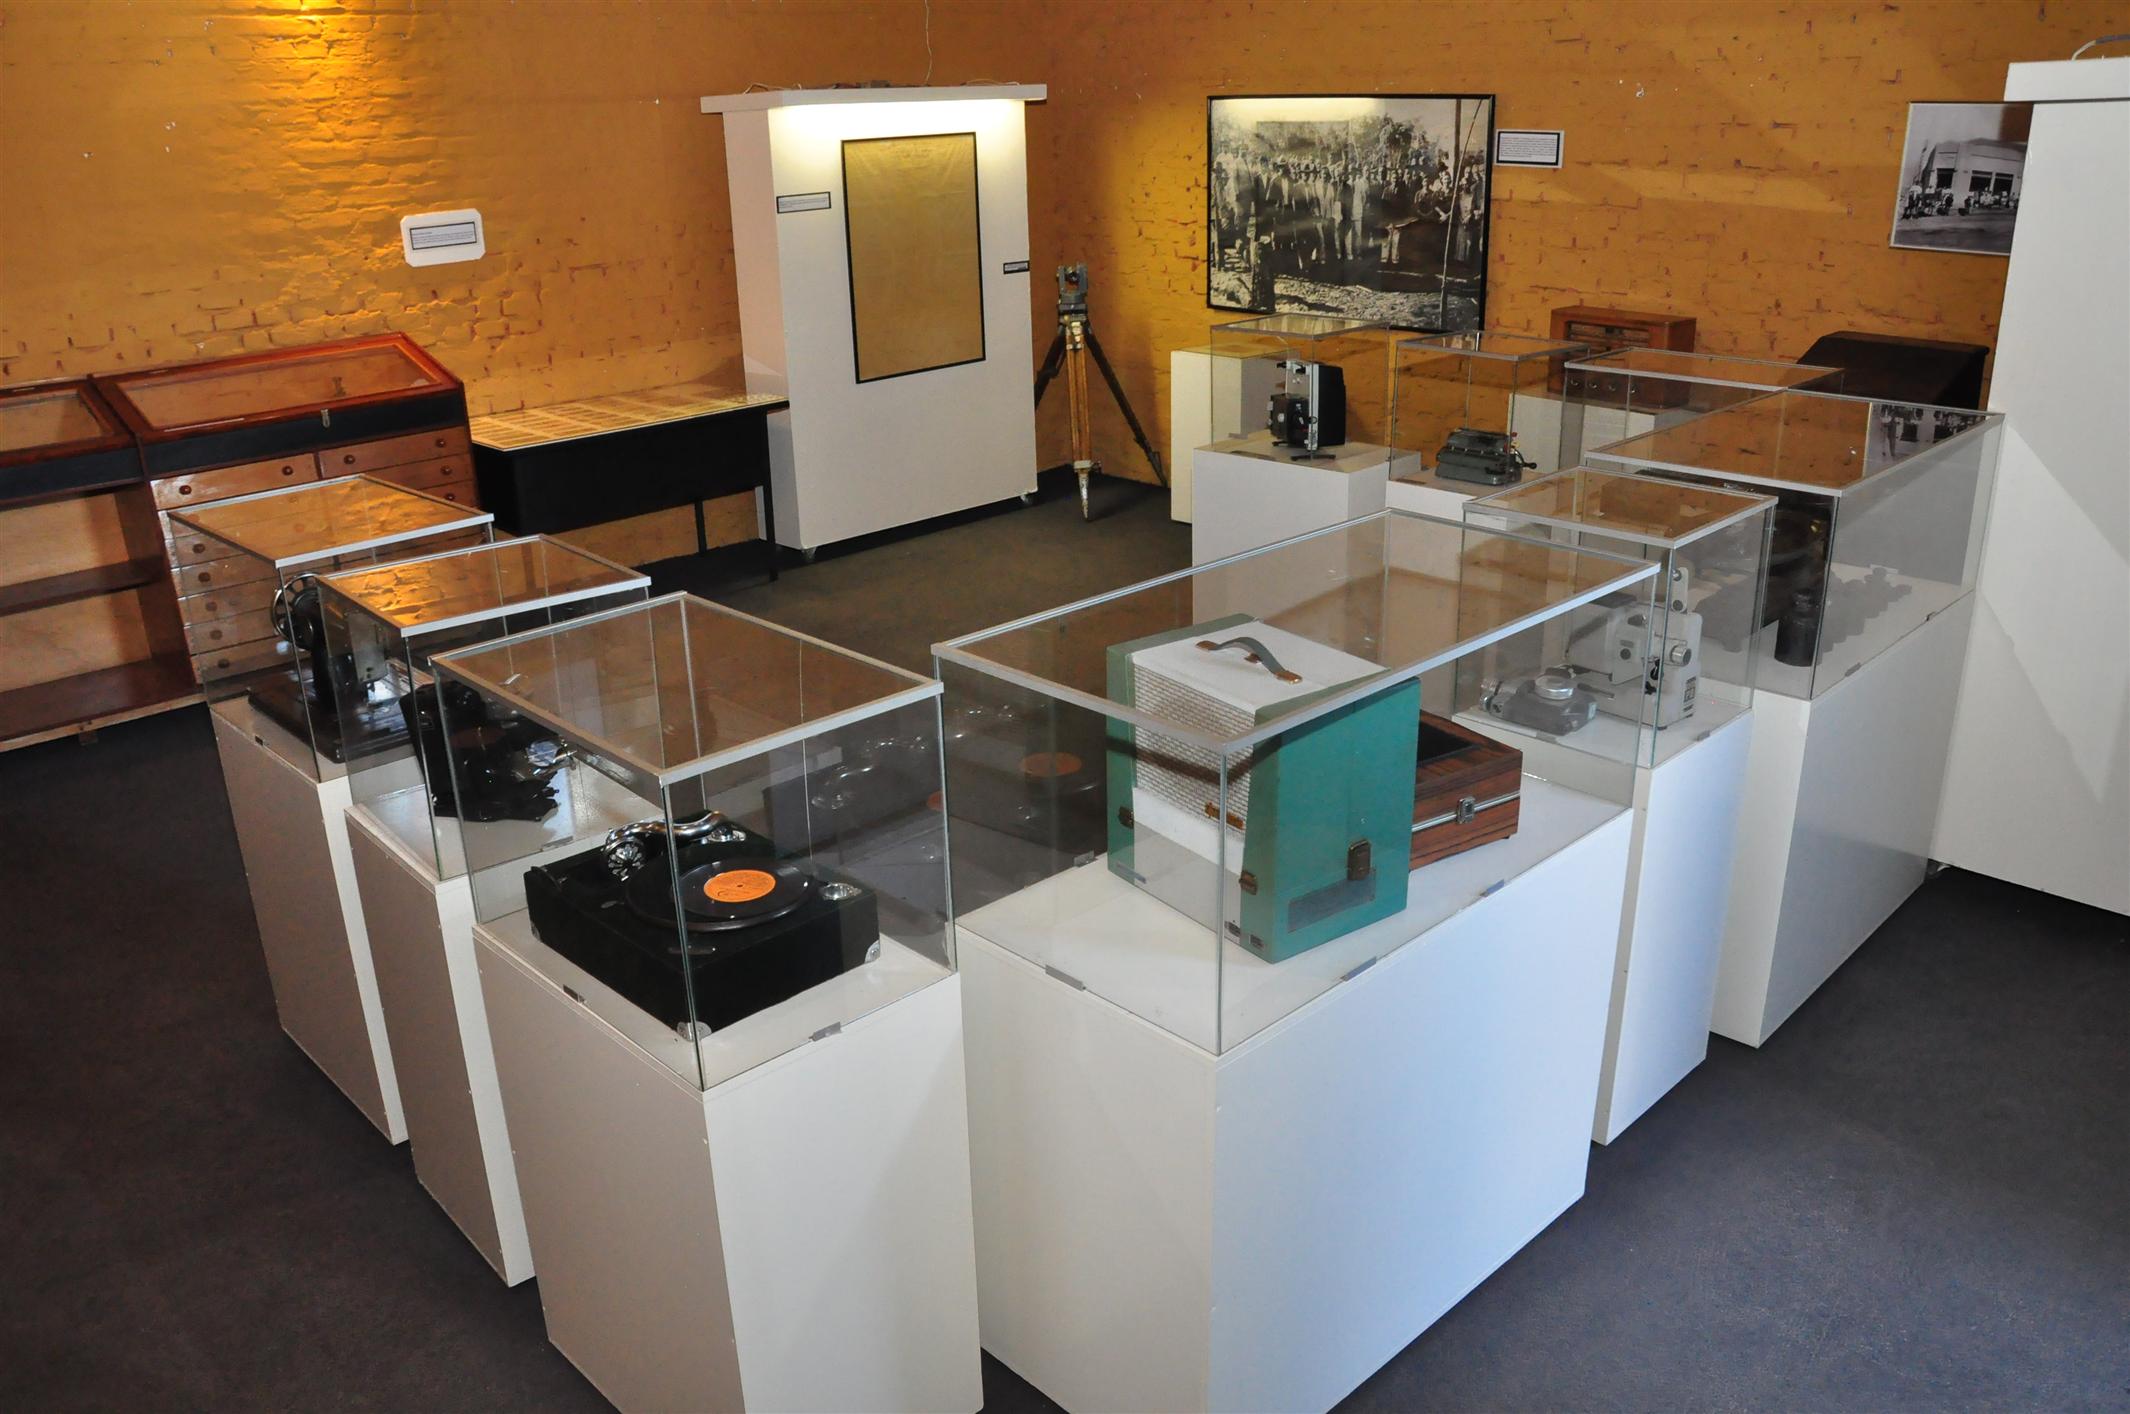 a display case in a room with several old items